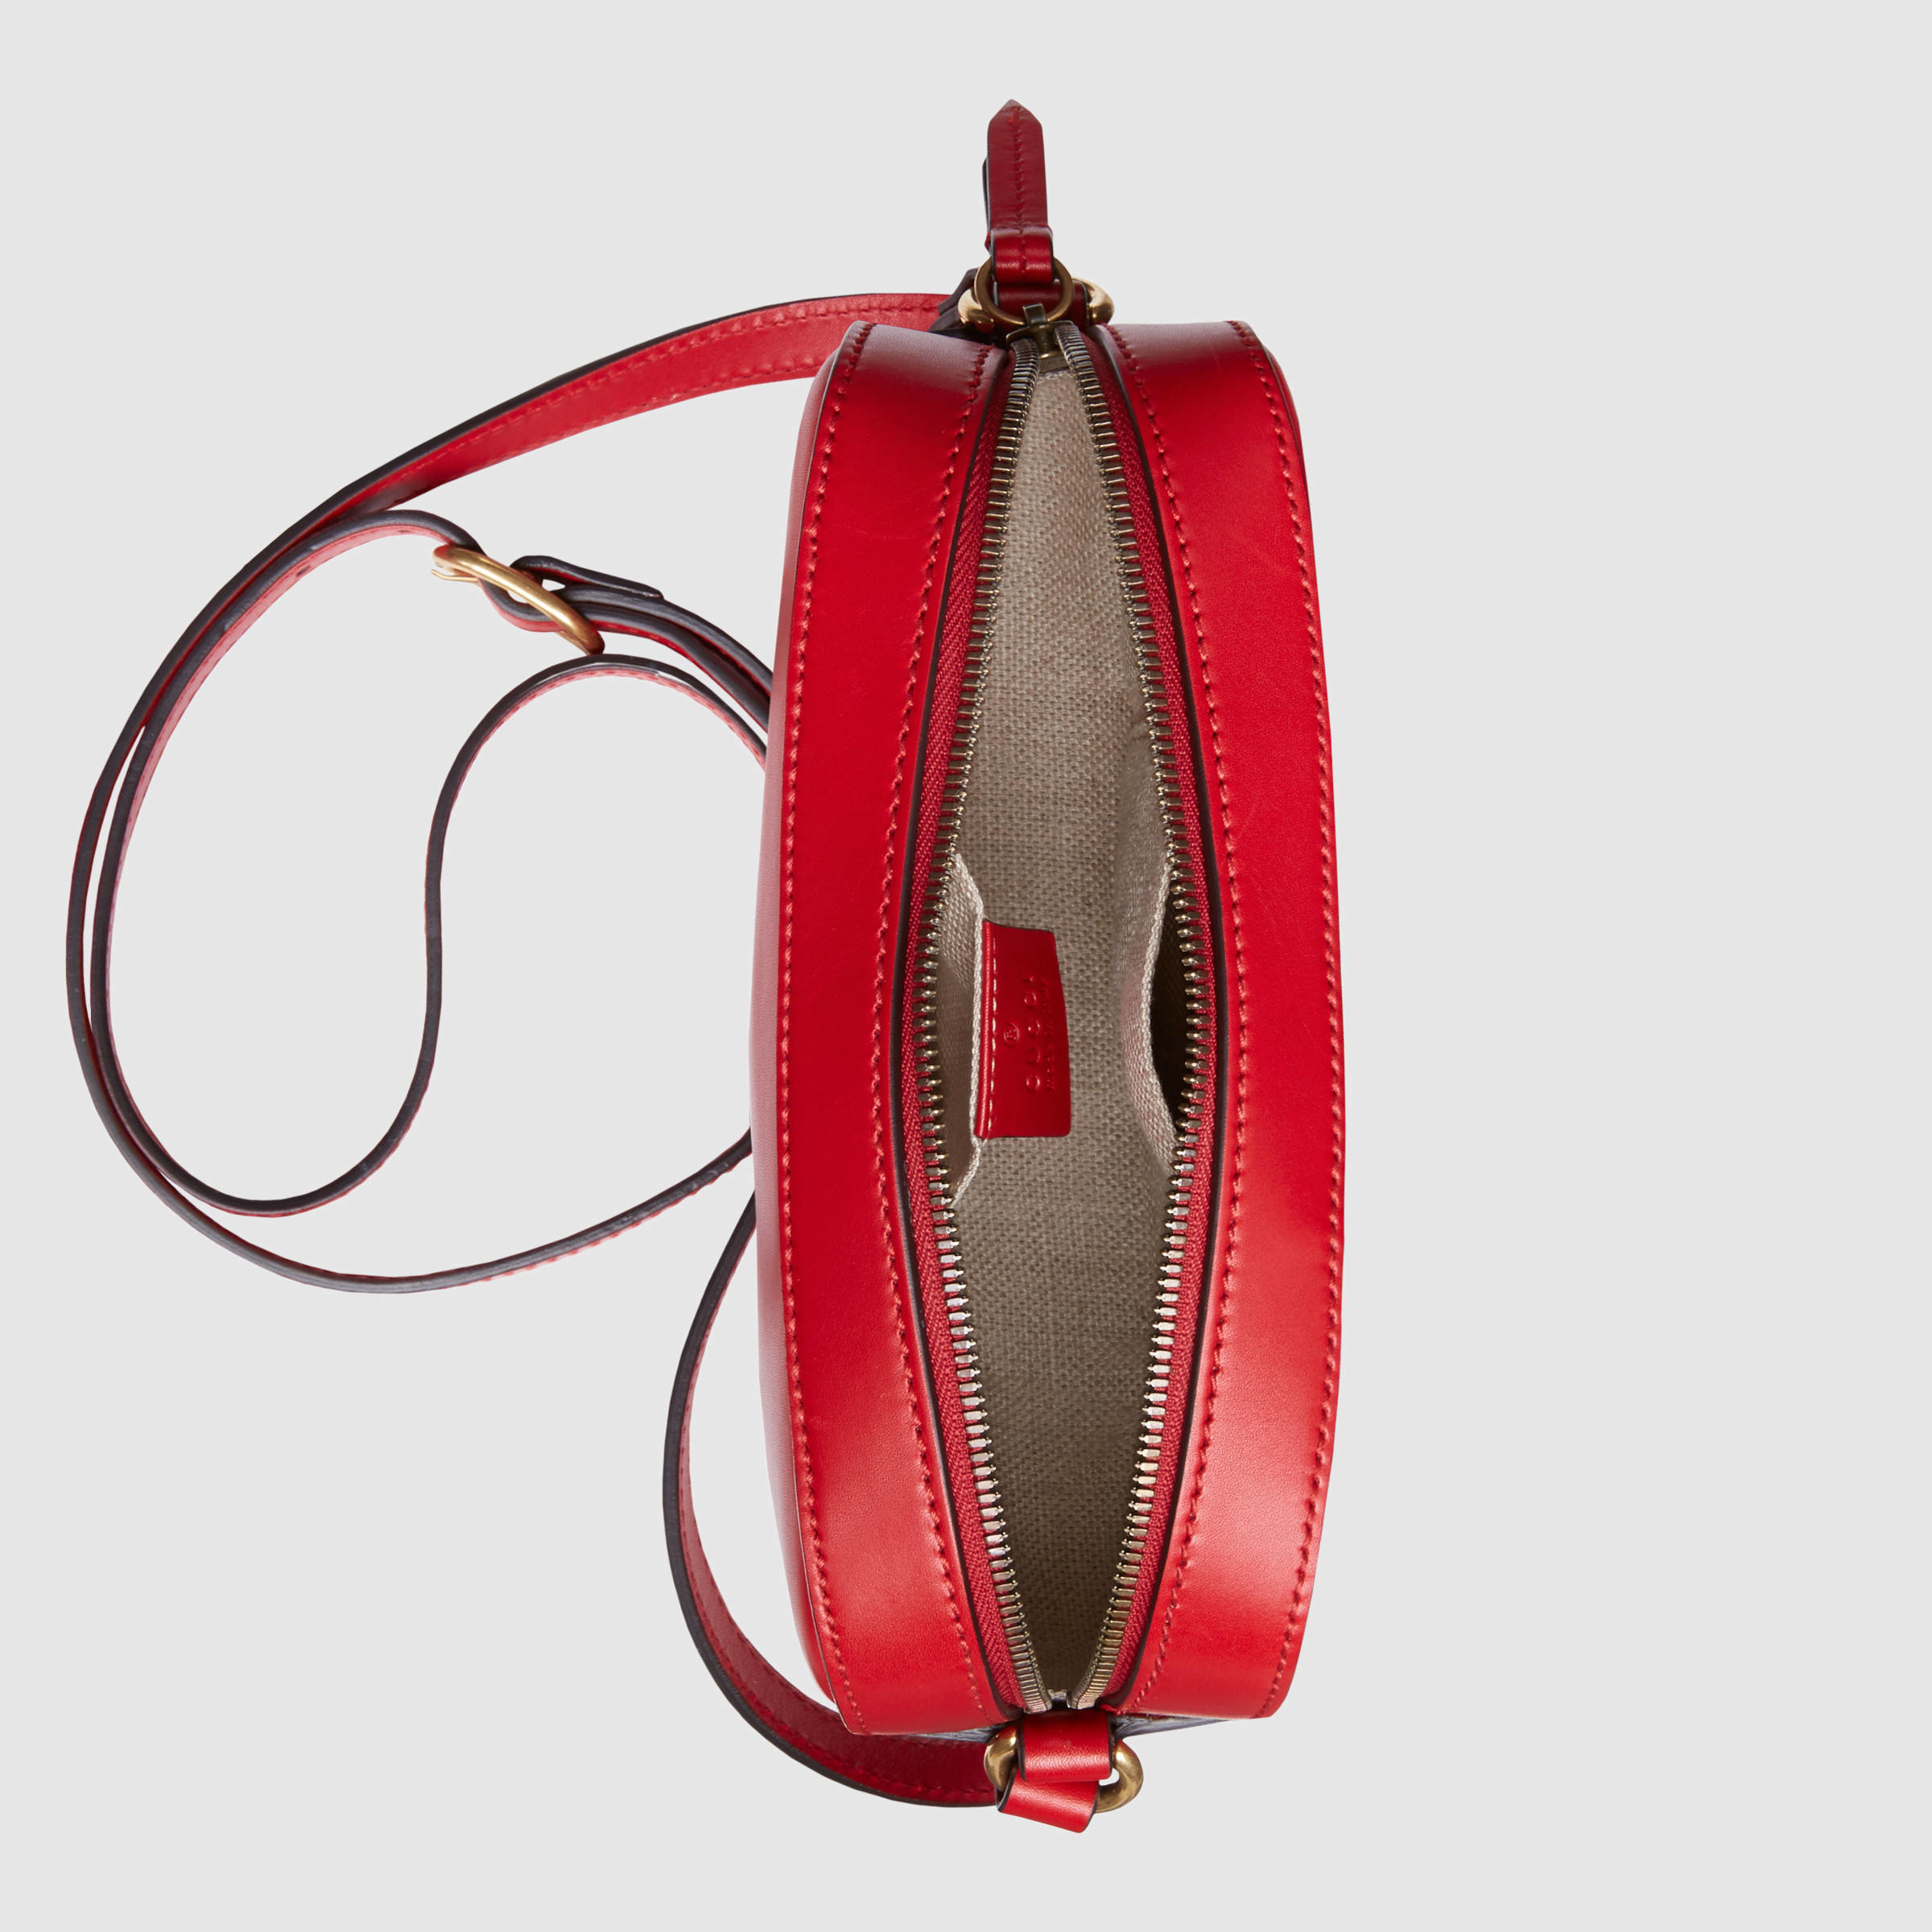 Gucci Bee Web Leather Shoulder Bag in Red Leather (Red) - Lyst